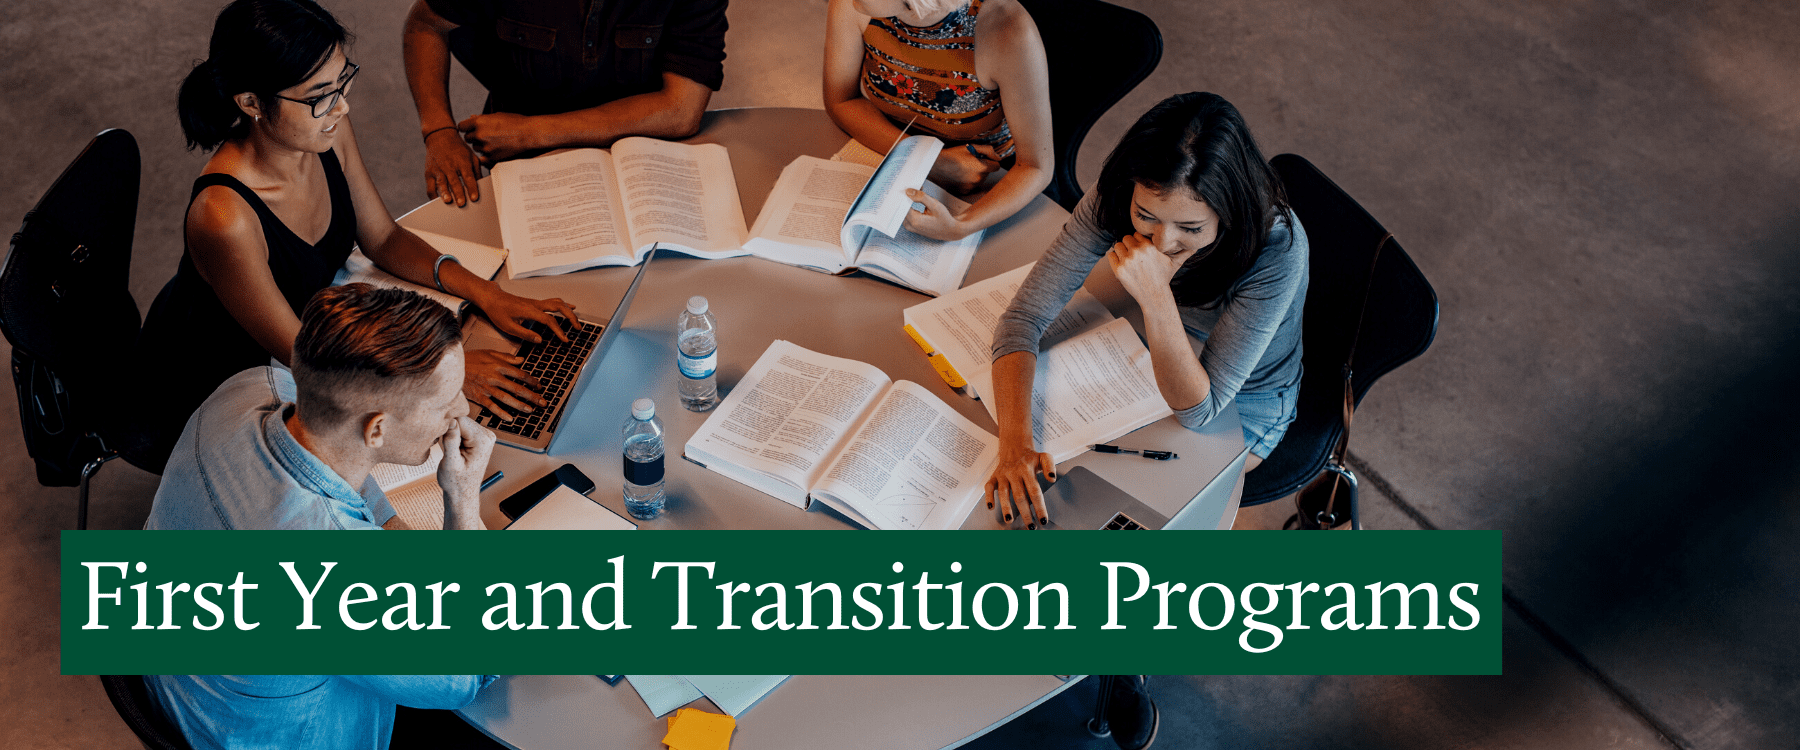 first year and transition programs